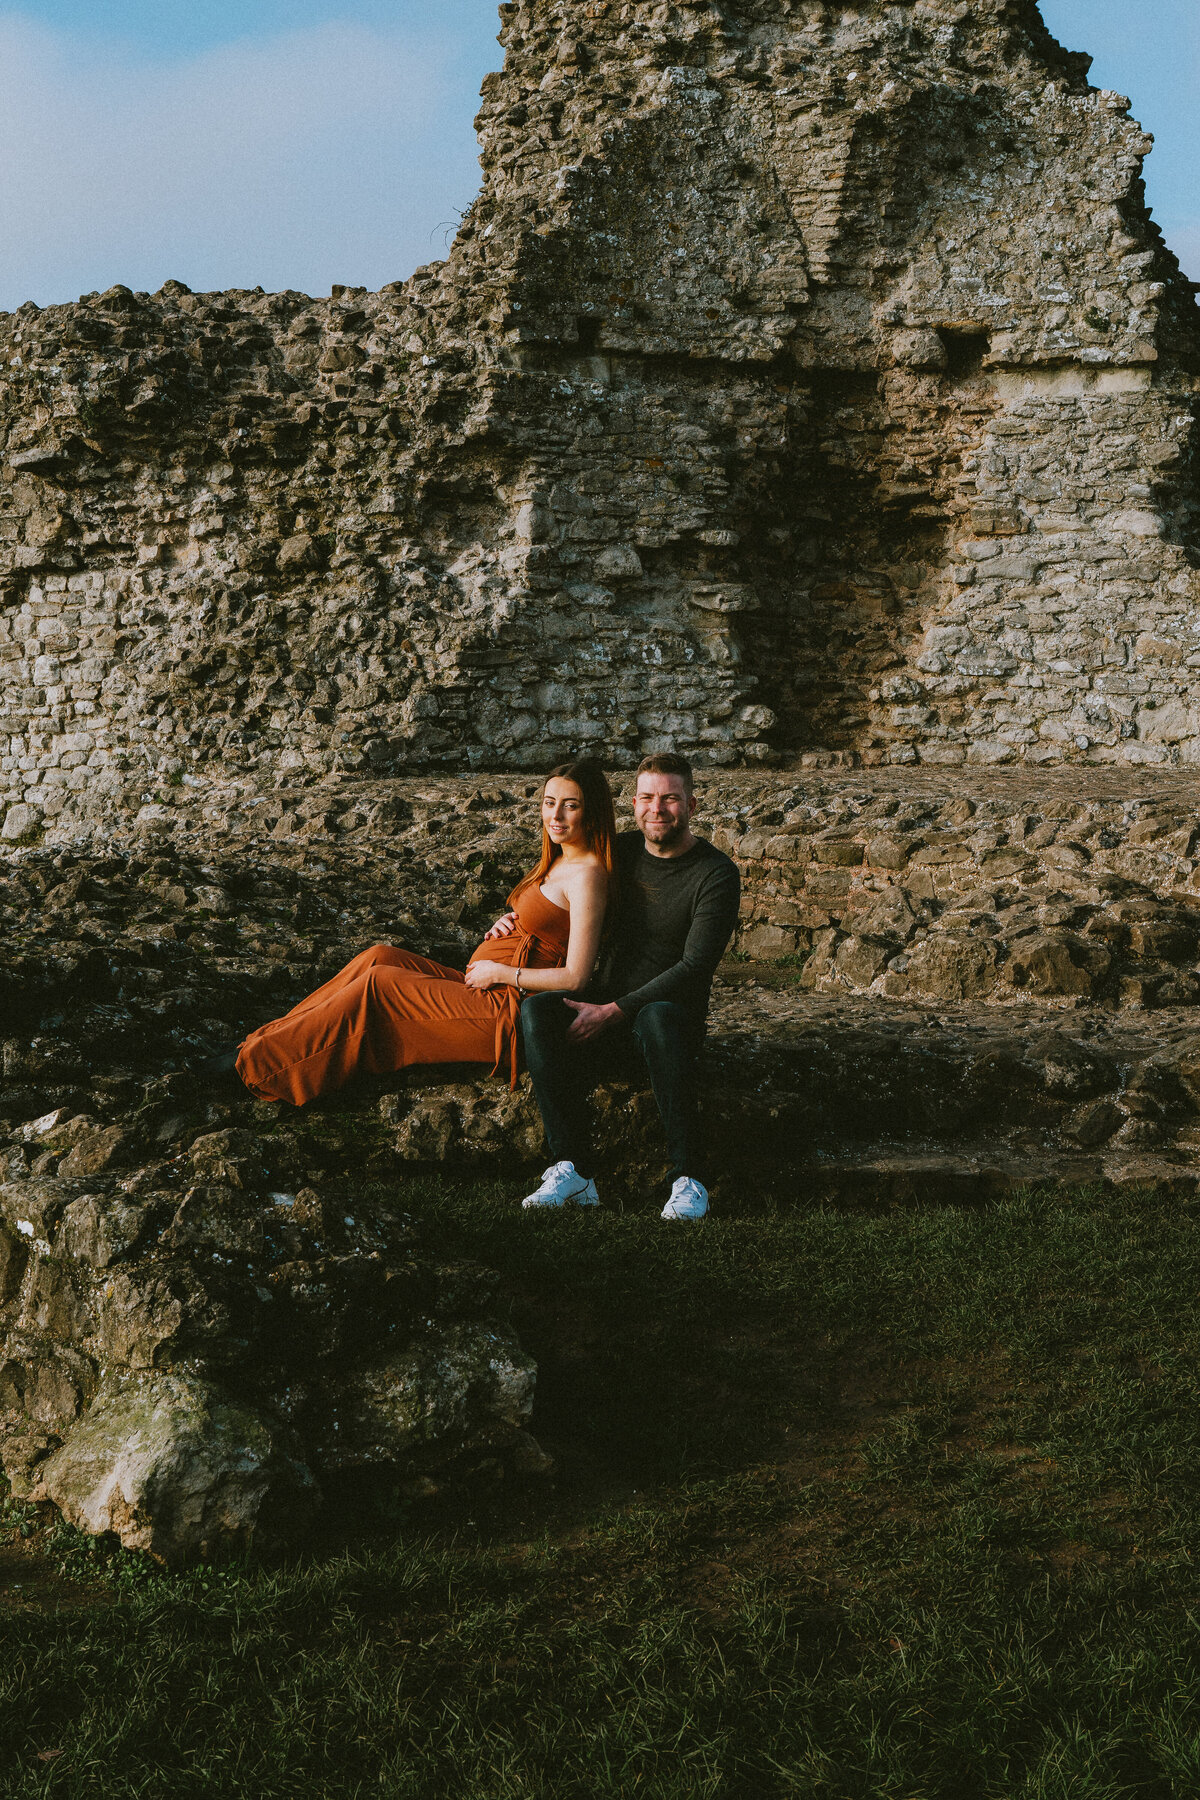 Hadleigh Castle, amazing location for this Maternity shoot